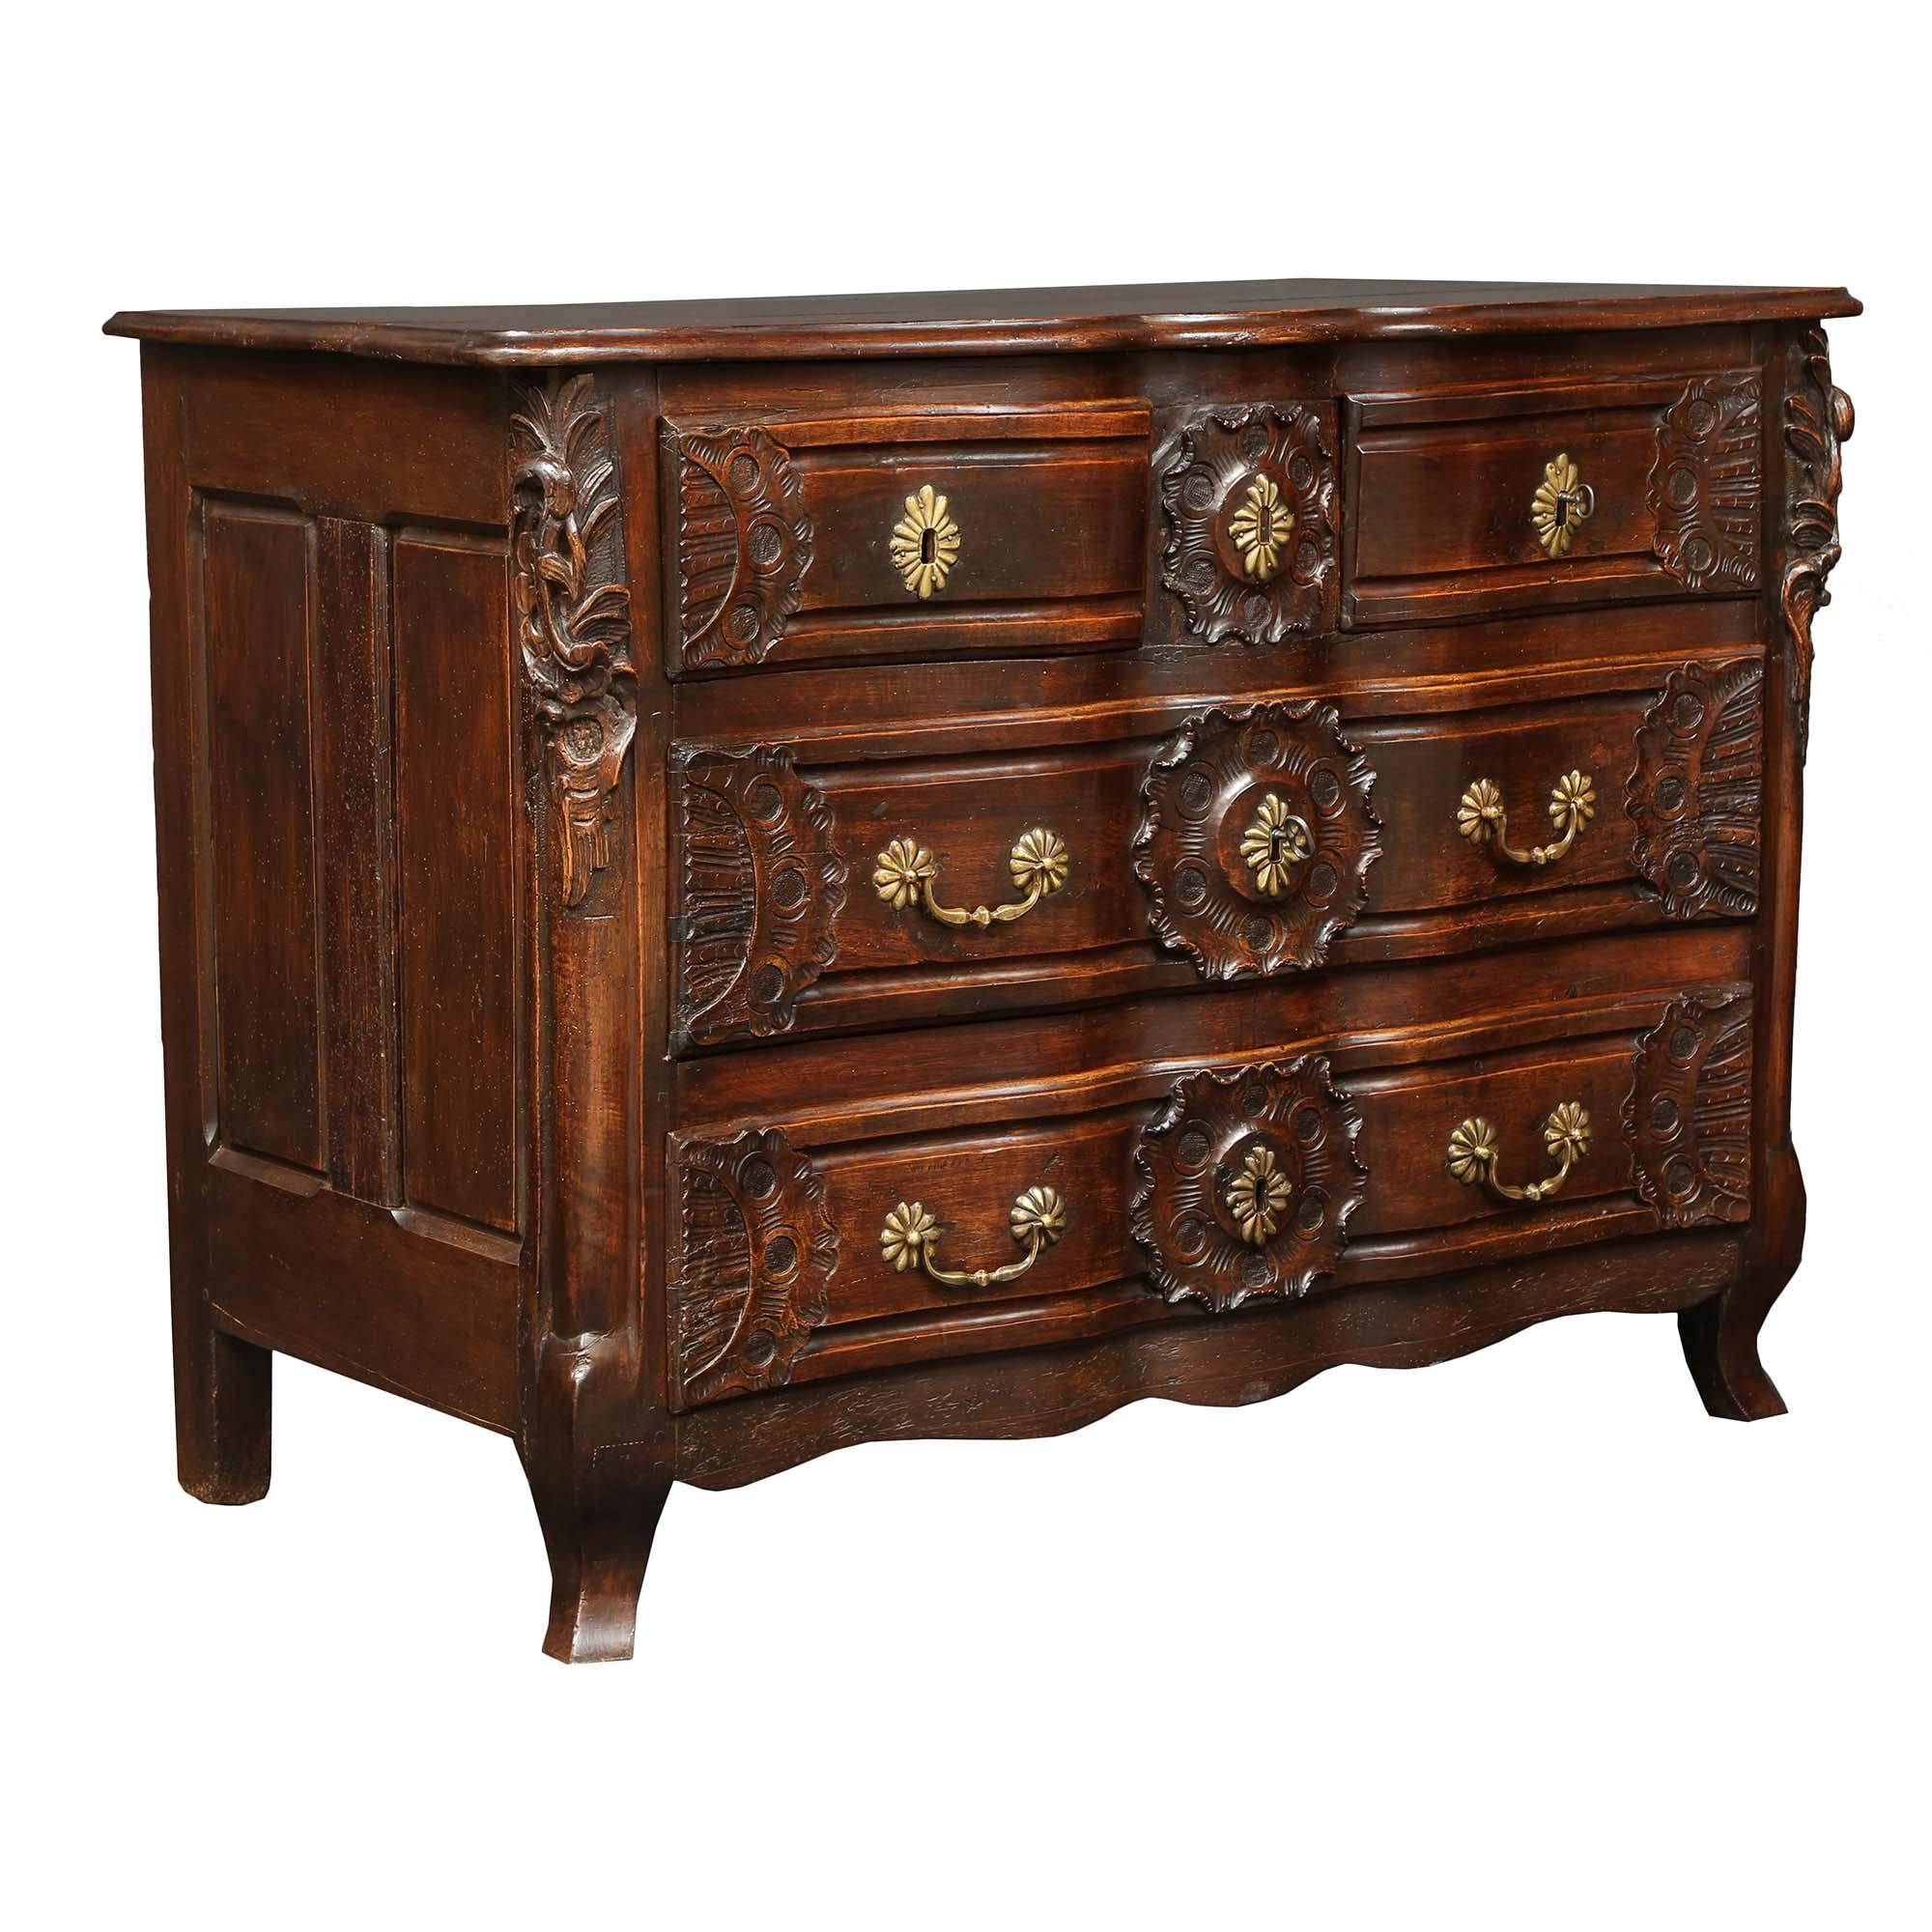 French Provincial 18th Century Louis XV Period Walnut Commode In Good Condition For Sale In West Palm Beach, FL